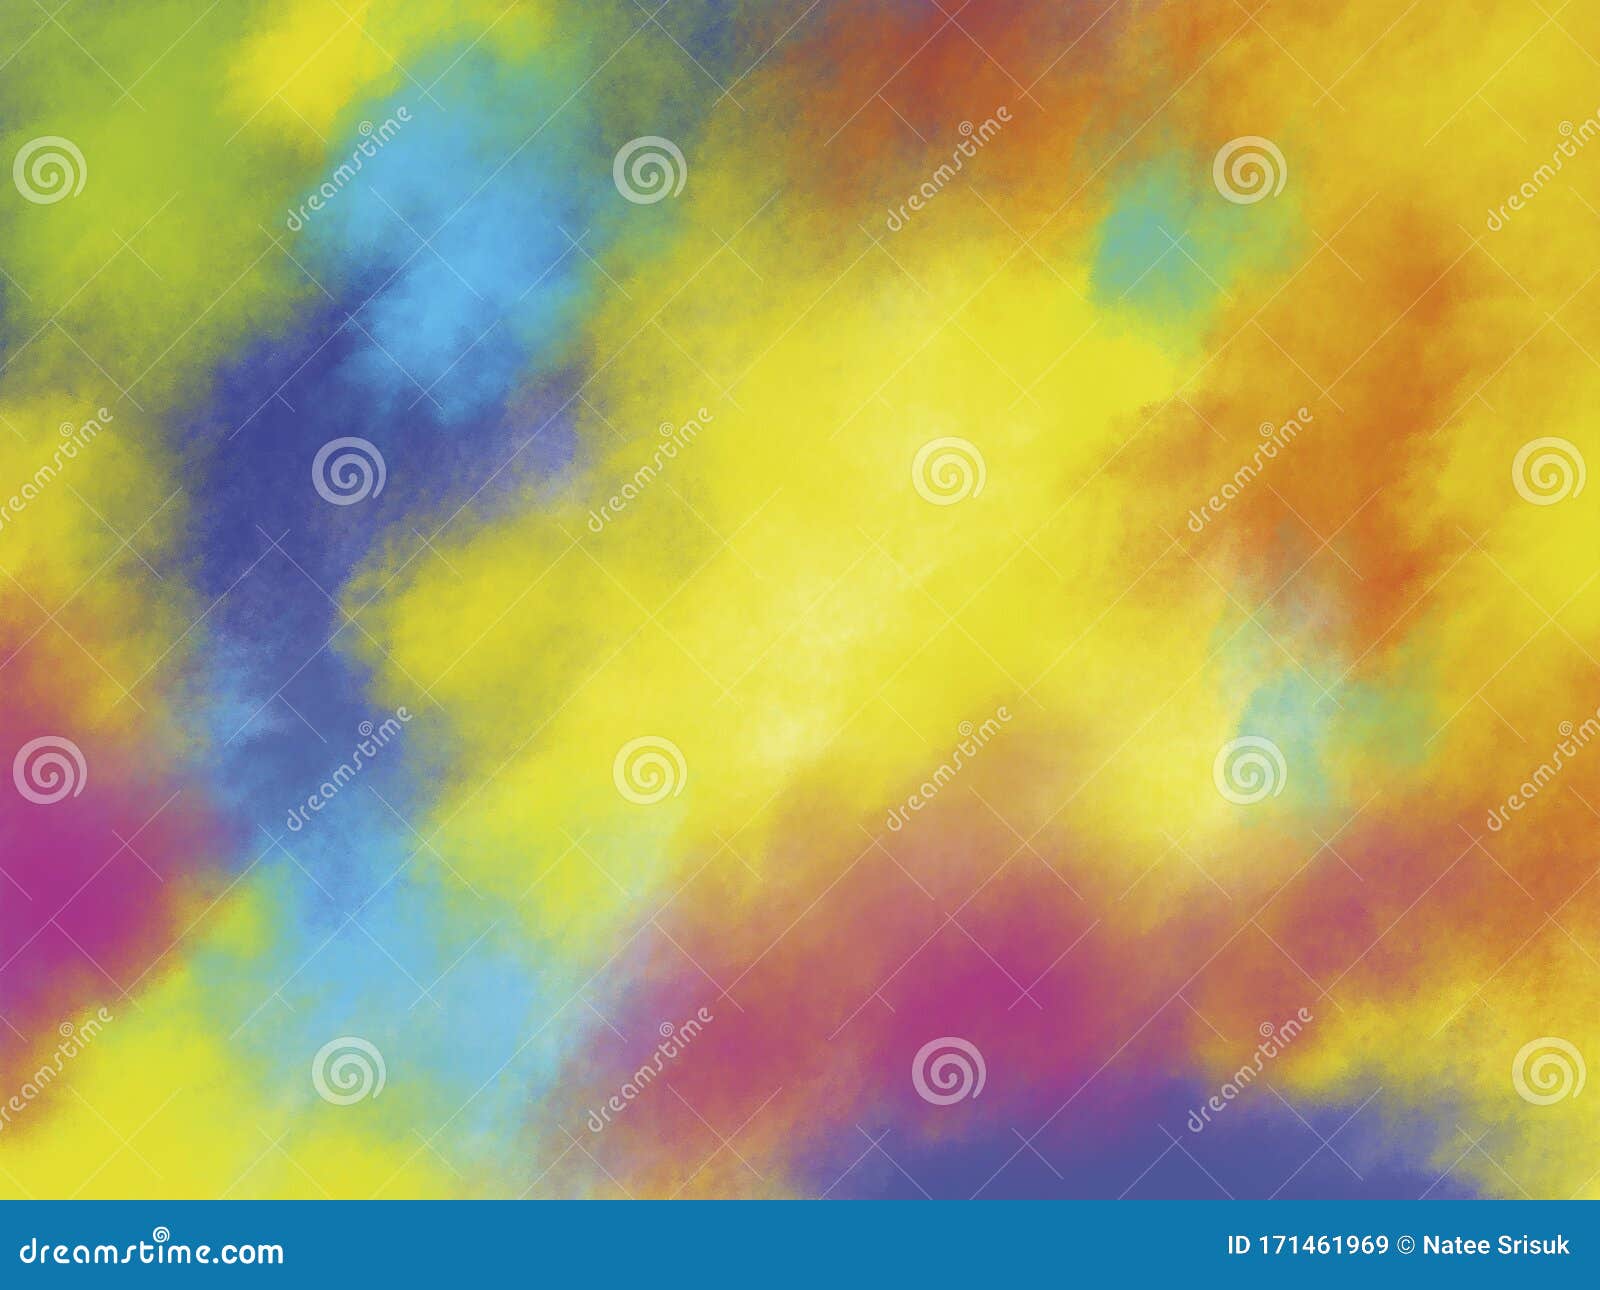 Happy Holi Editing Background  Picsart Holi Background Png Transparent  Png  1000x12502125770  PngFind